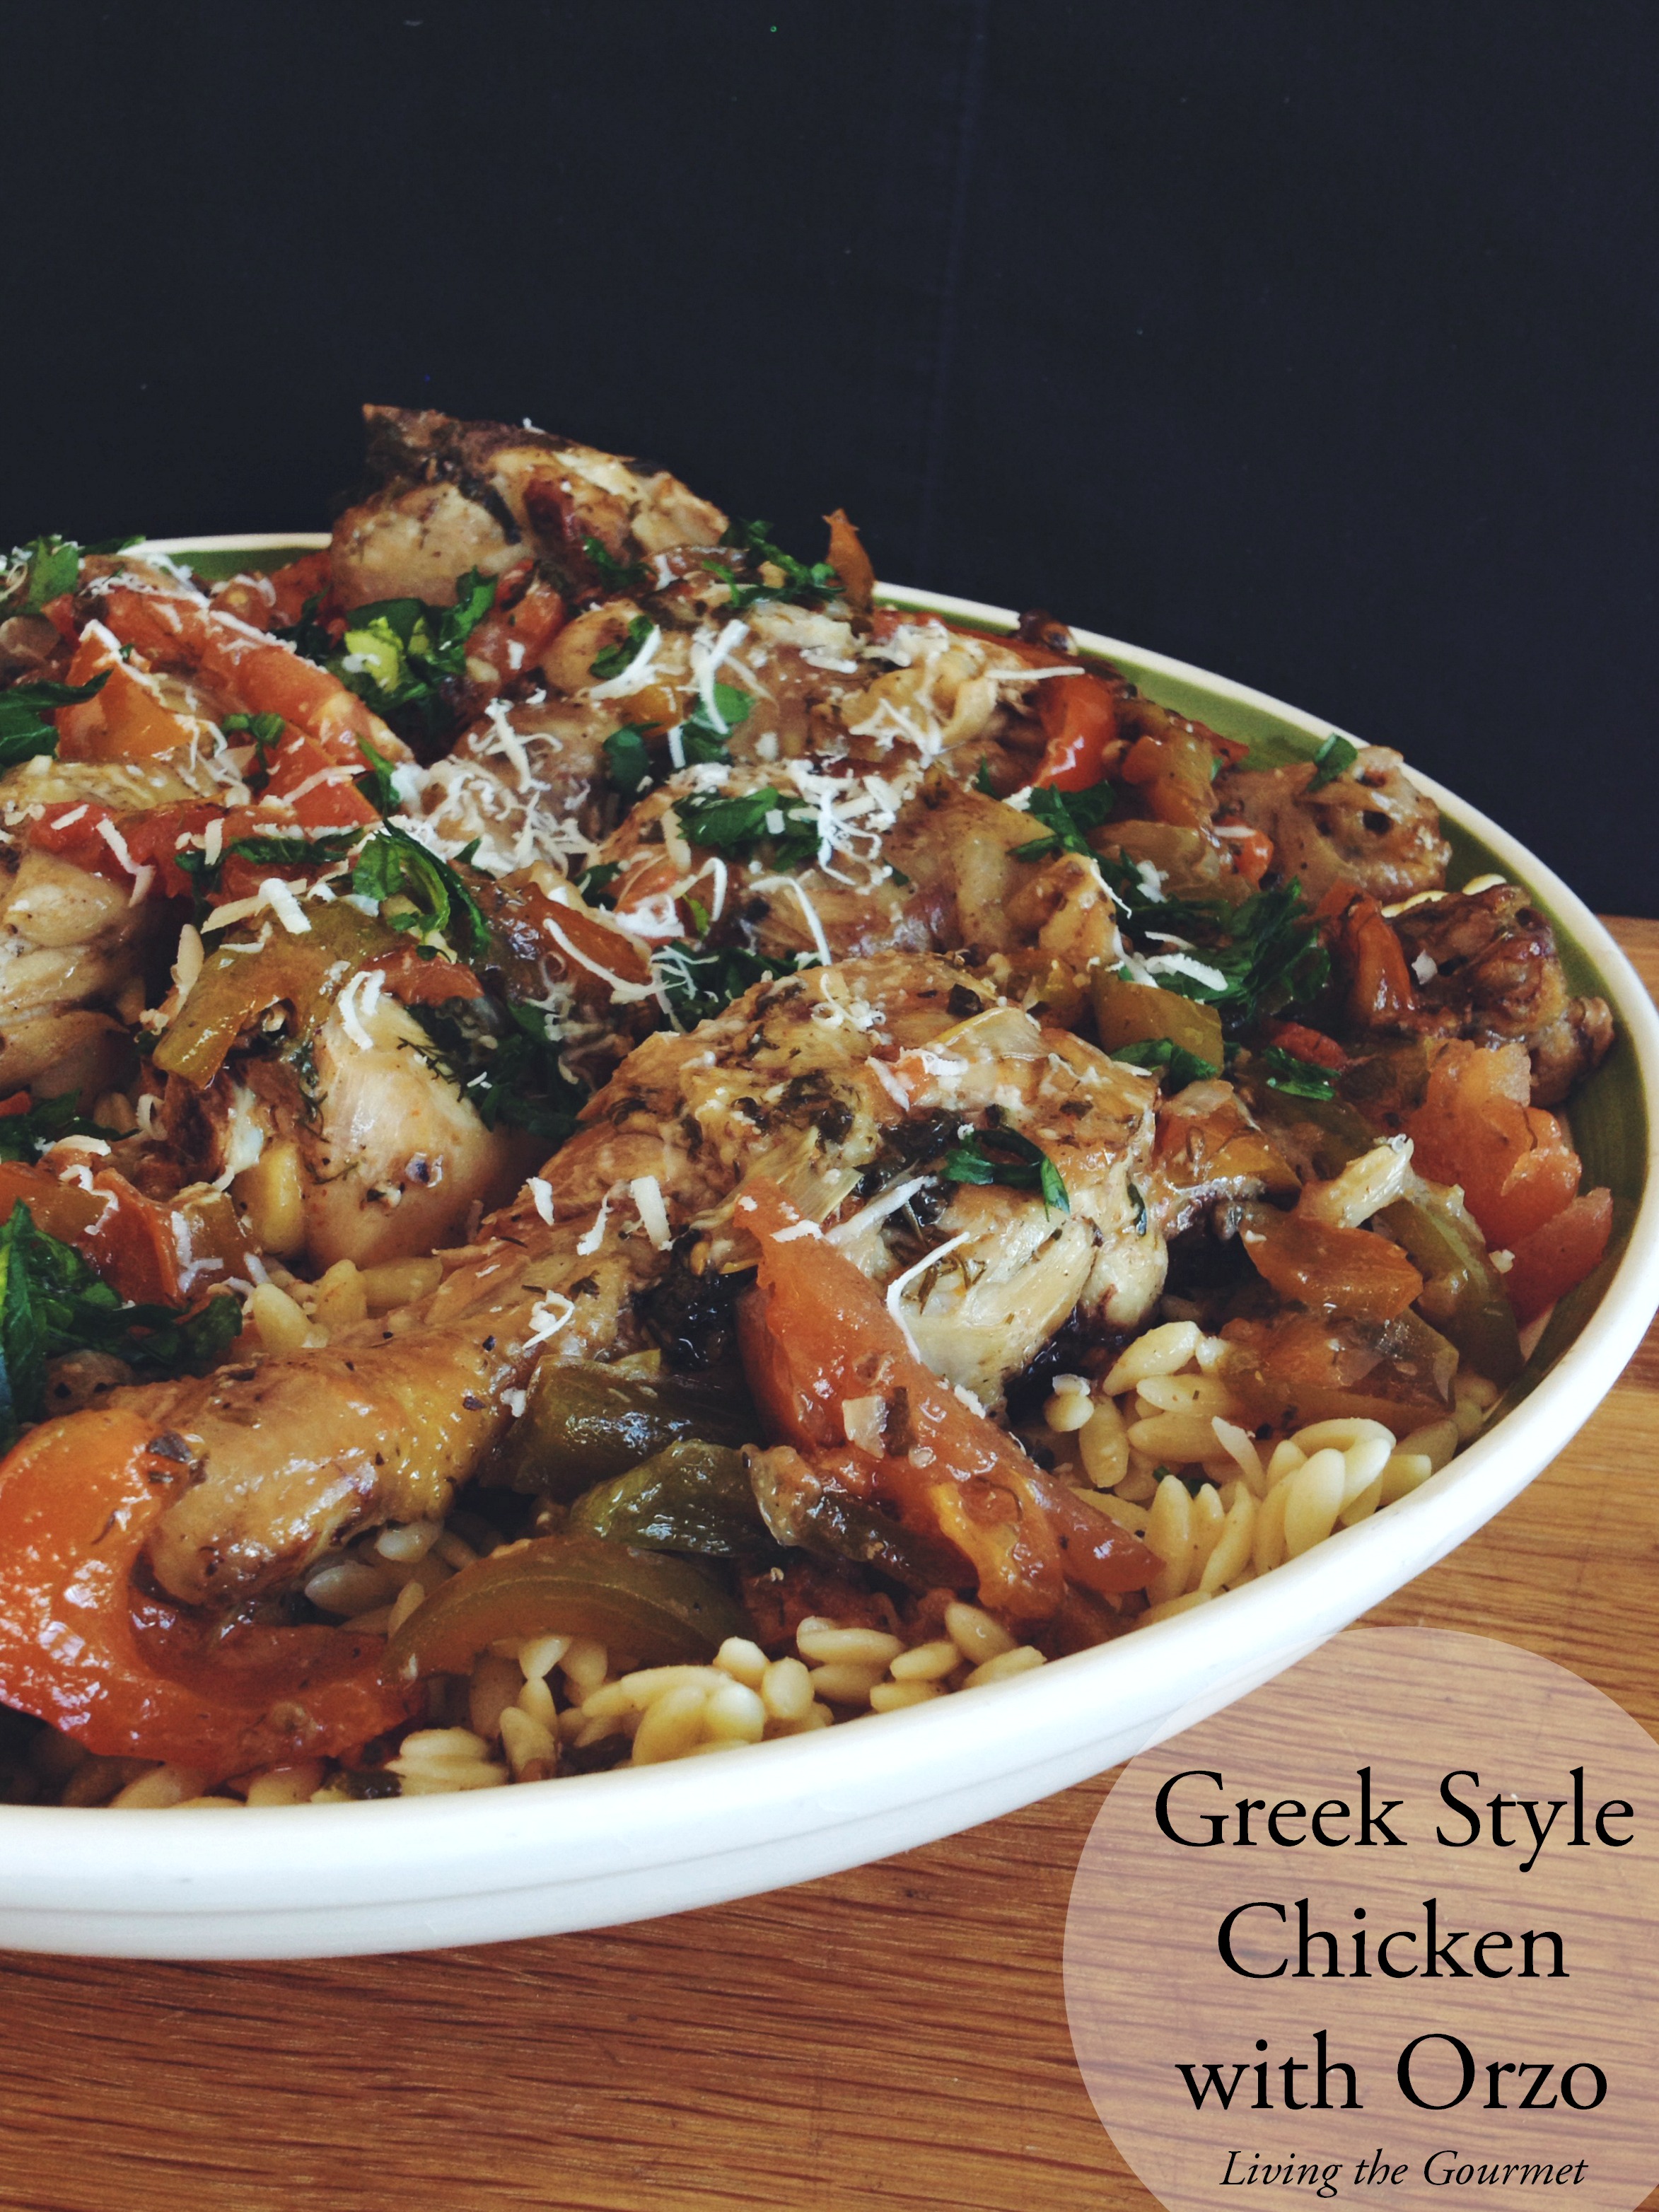 Living the Gourmet: Greek Style Chicken with Orzo